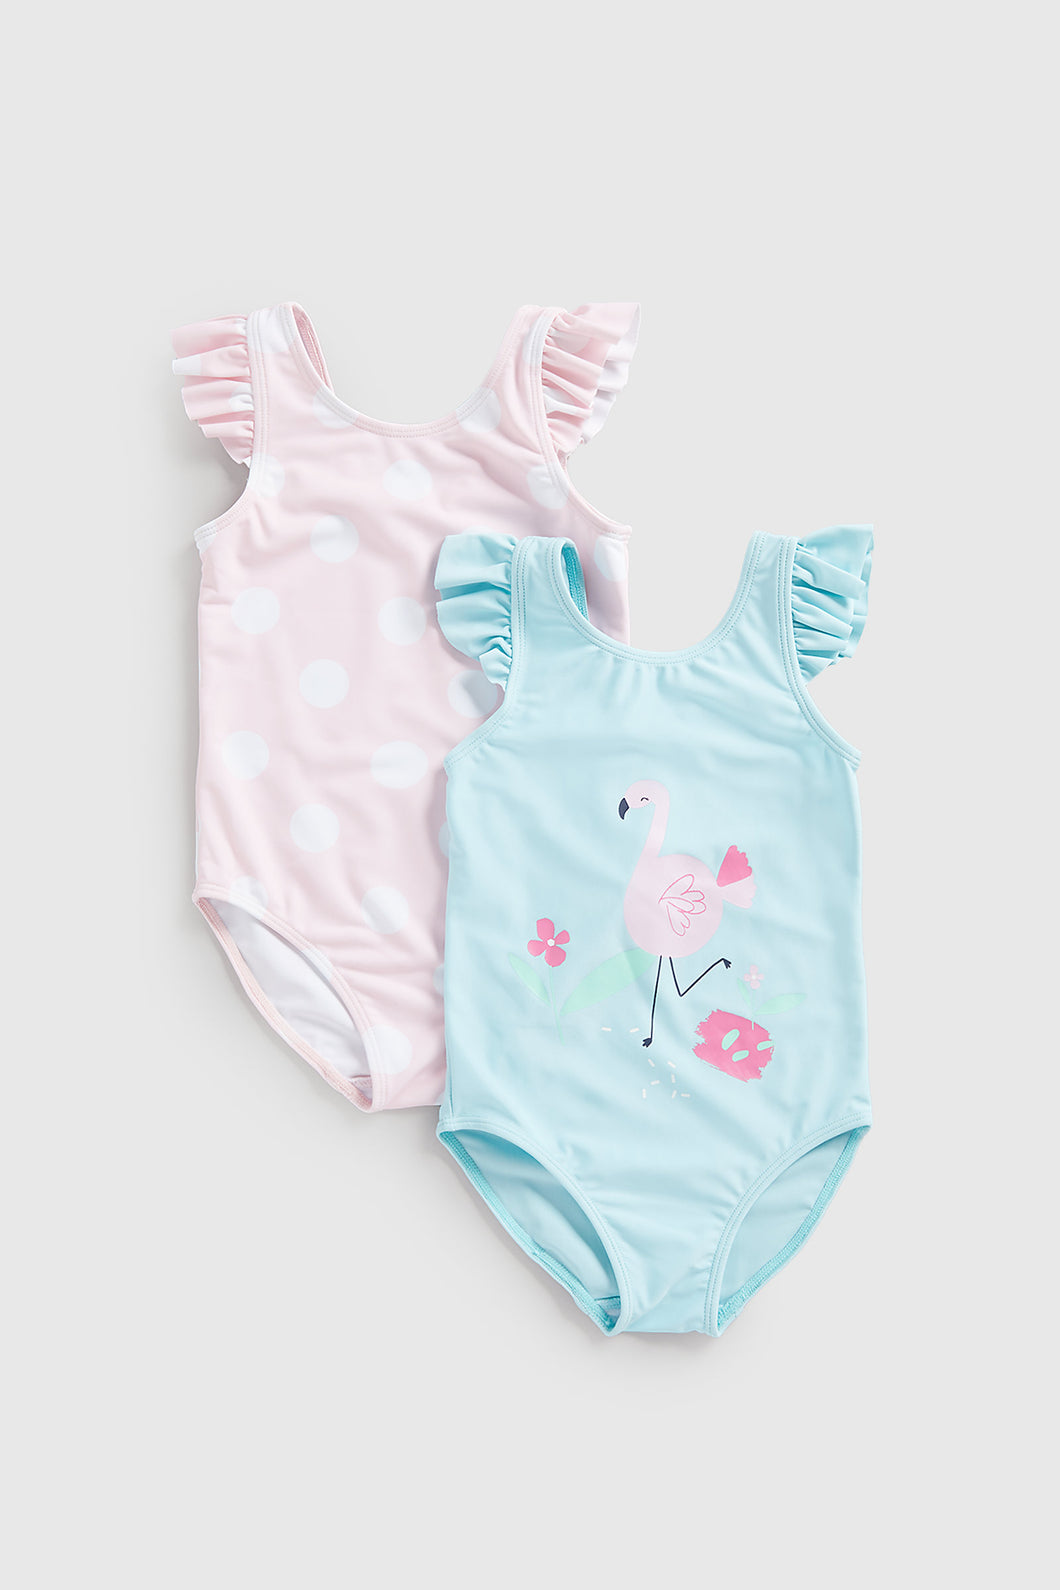 Mothercare Flamingo And Spot Swimsuits - 2 Pack